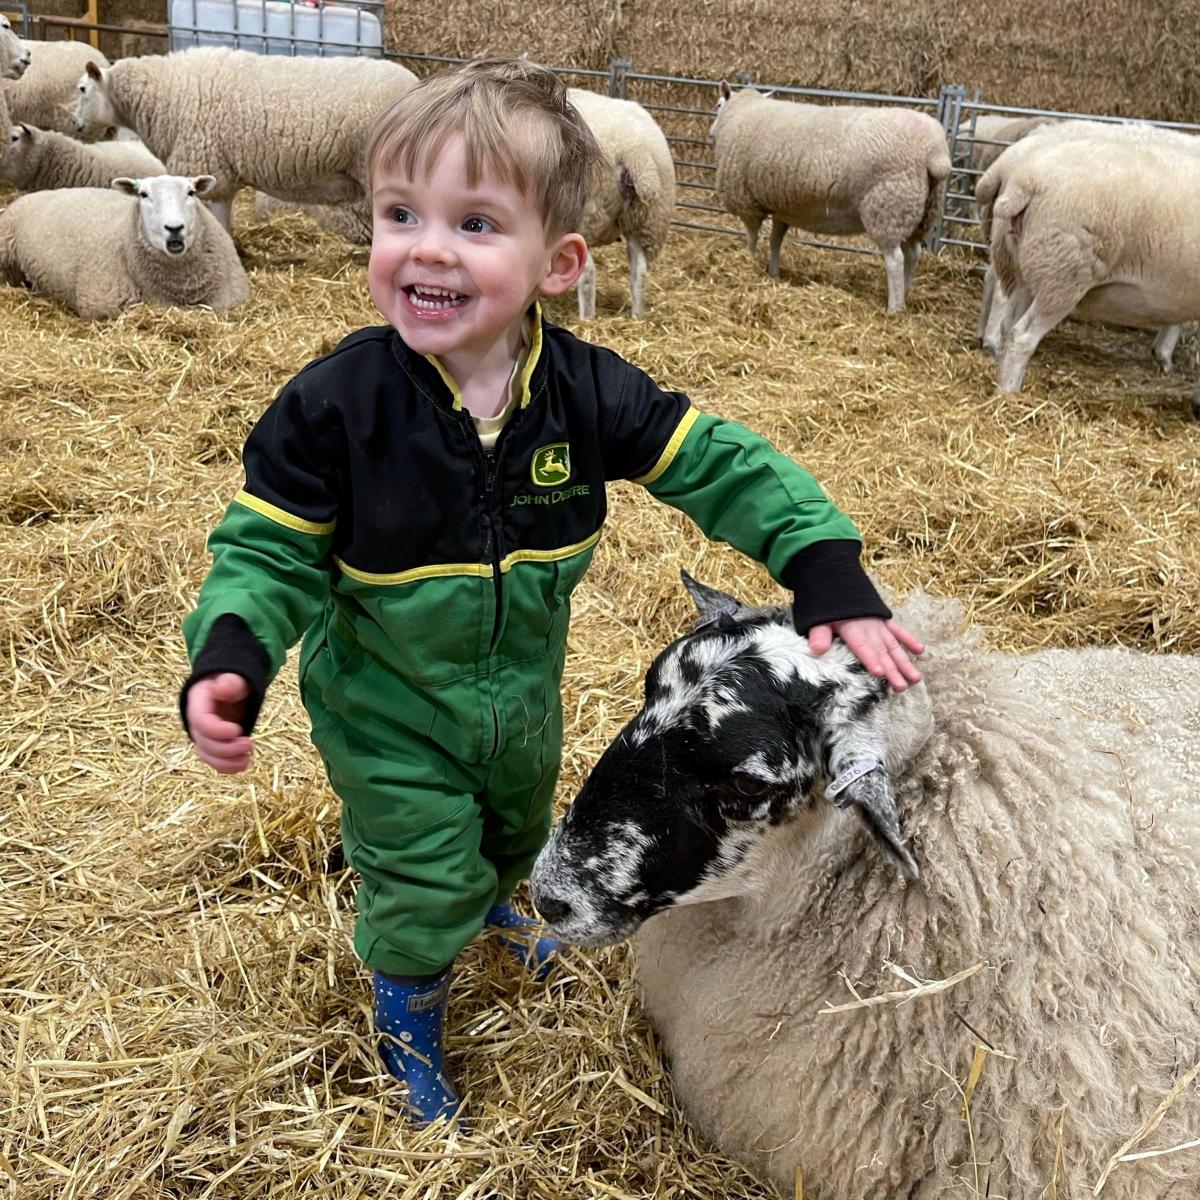 Nicola Capper - Robbie Capper helping with the lambing at his family’s farm at Houston, Renfrewshire